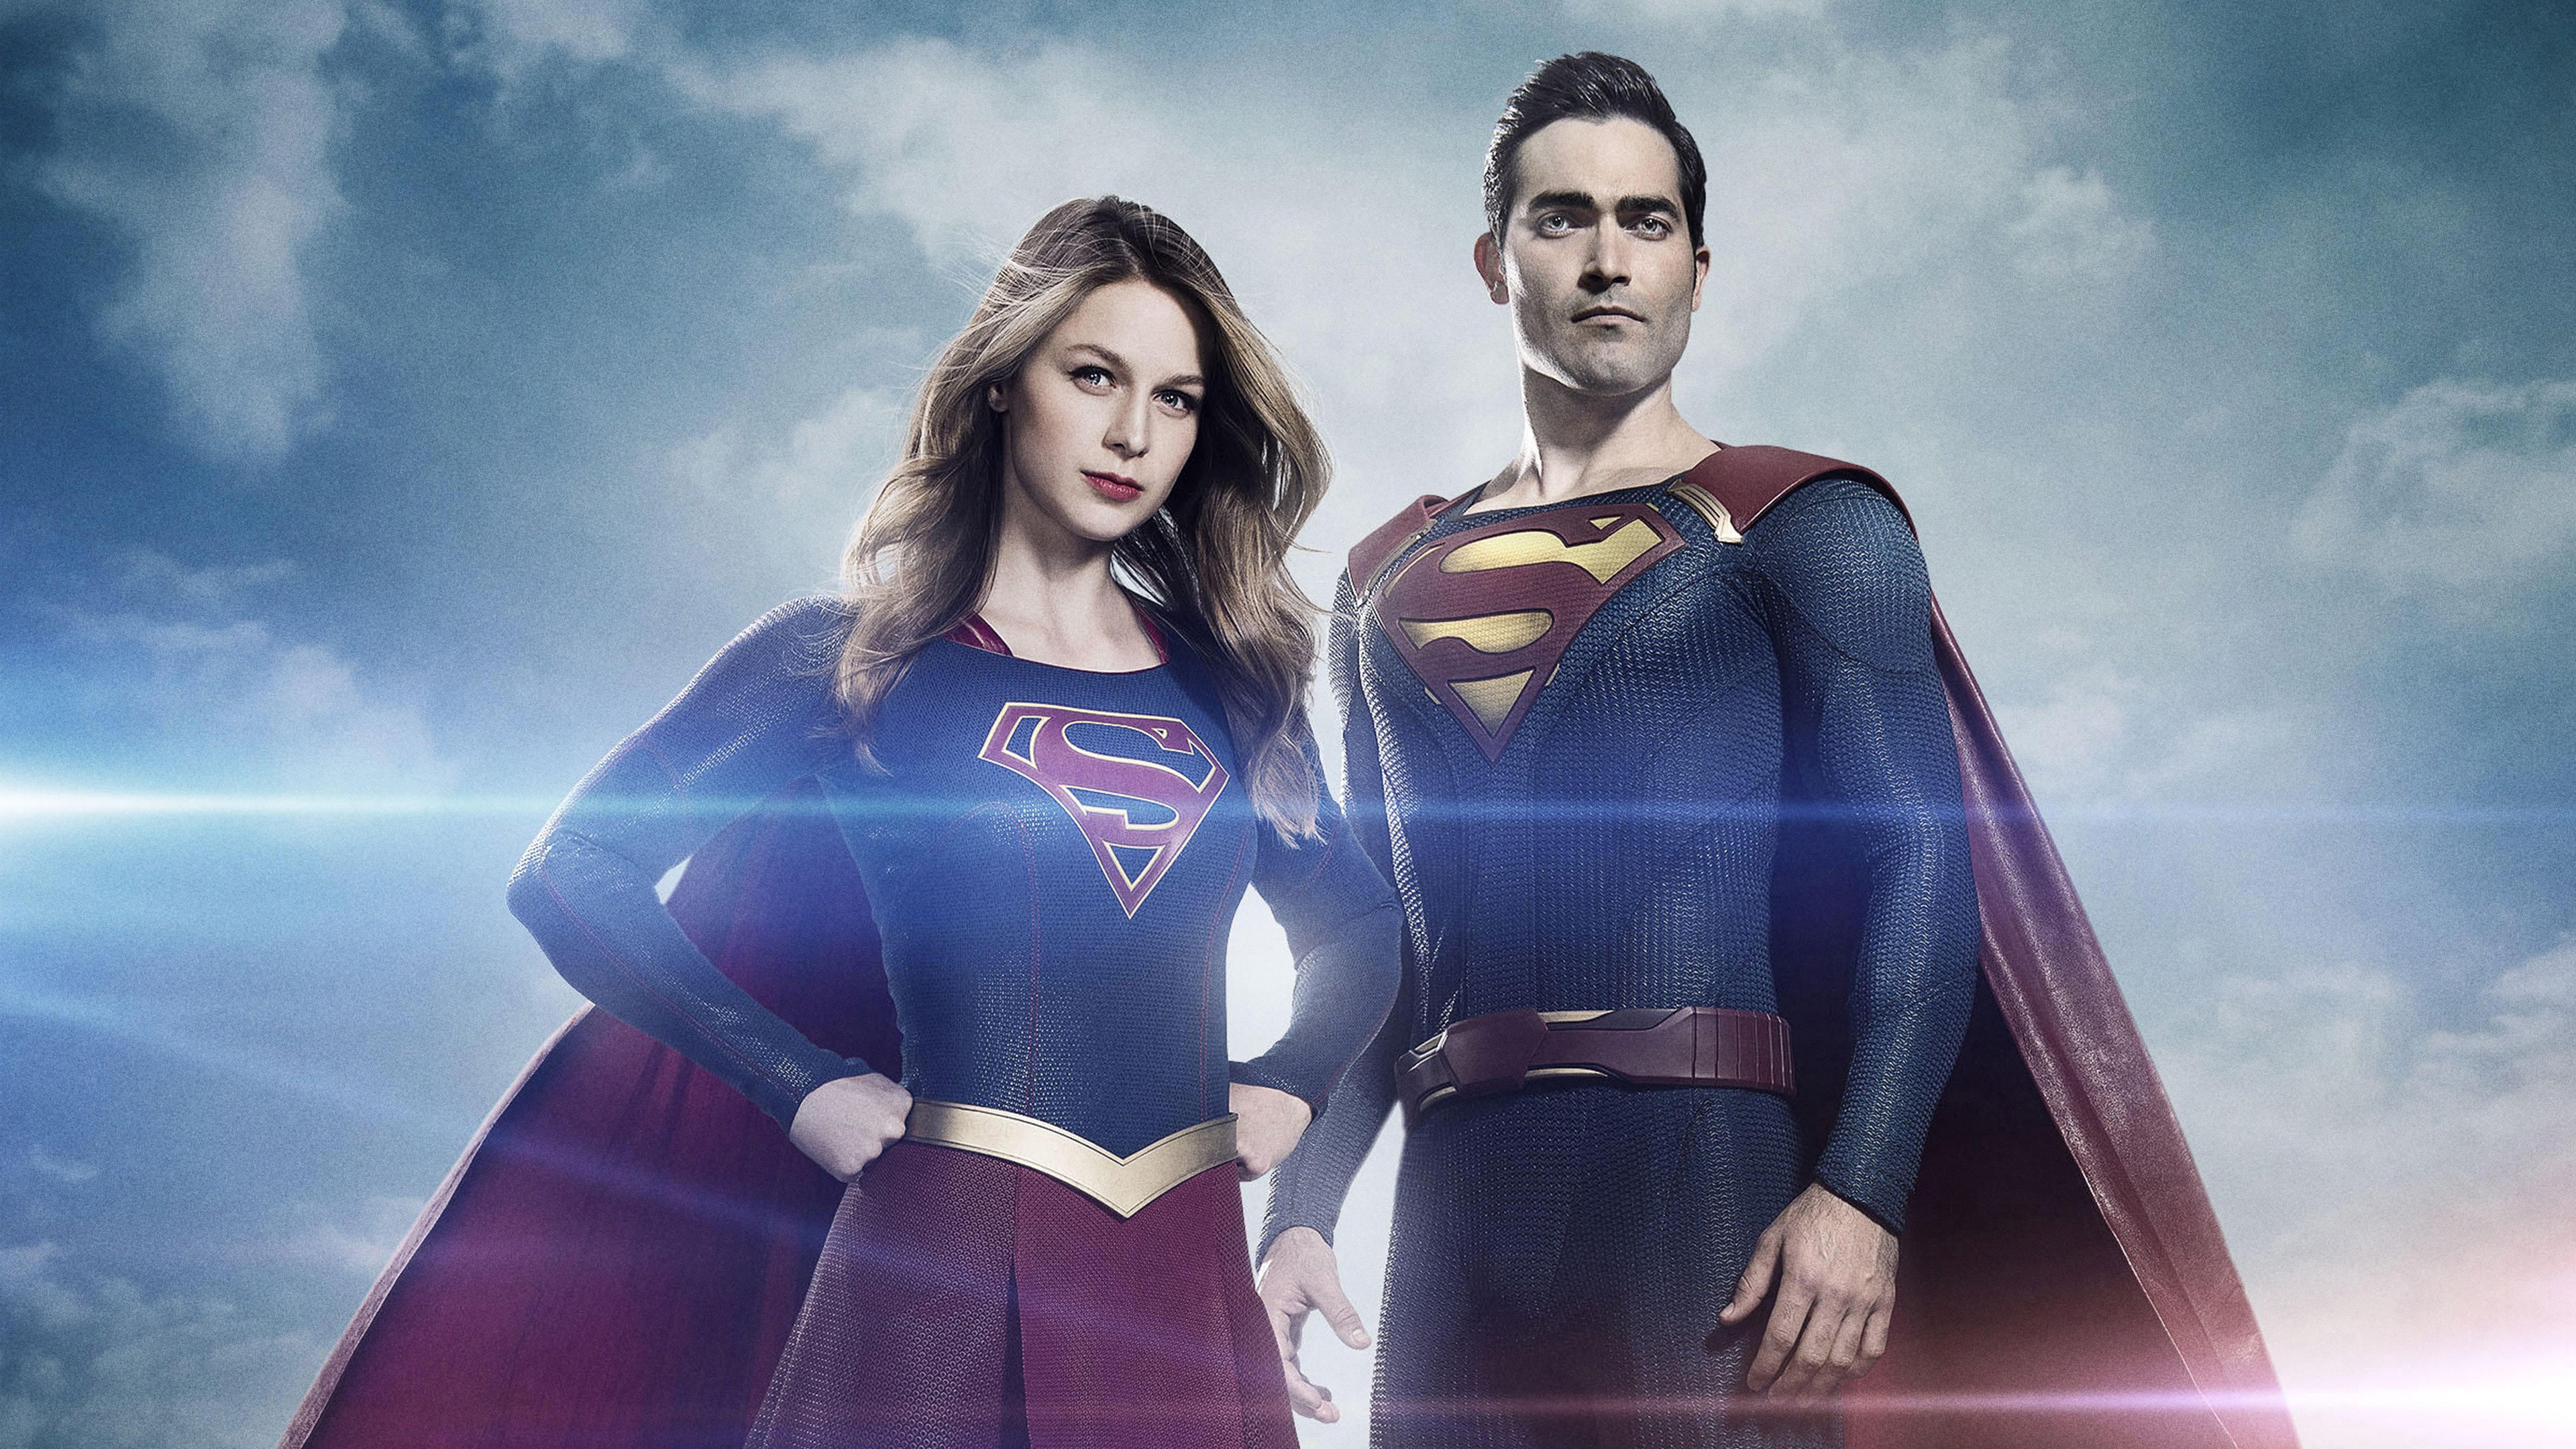 Our Sincerest Thanks To Wallpaper Abyss For Providing - Superman And Supergirl , HD Wallpaper & Backgrounds